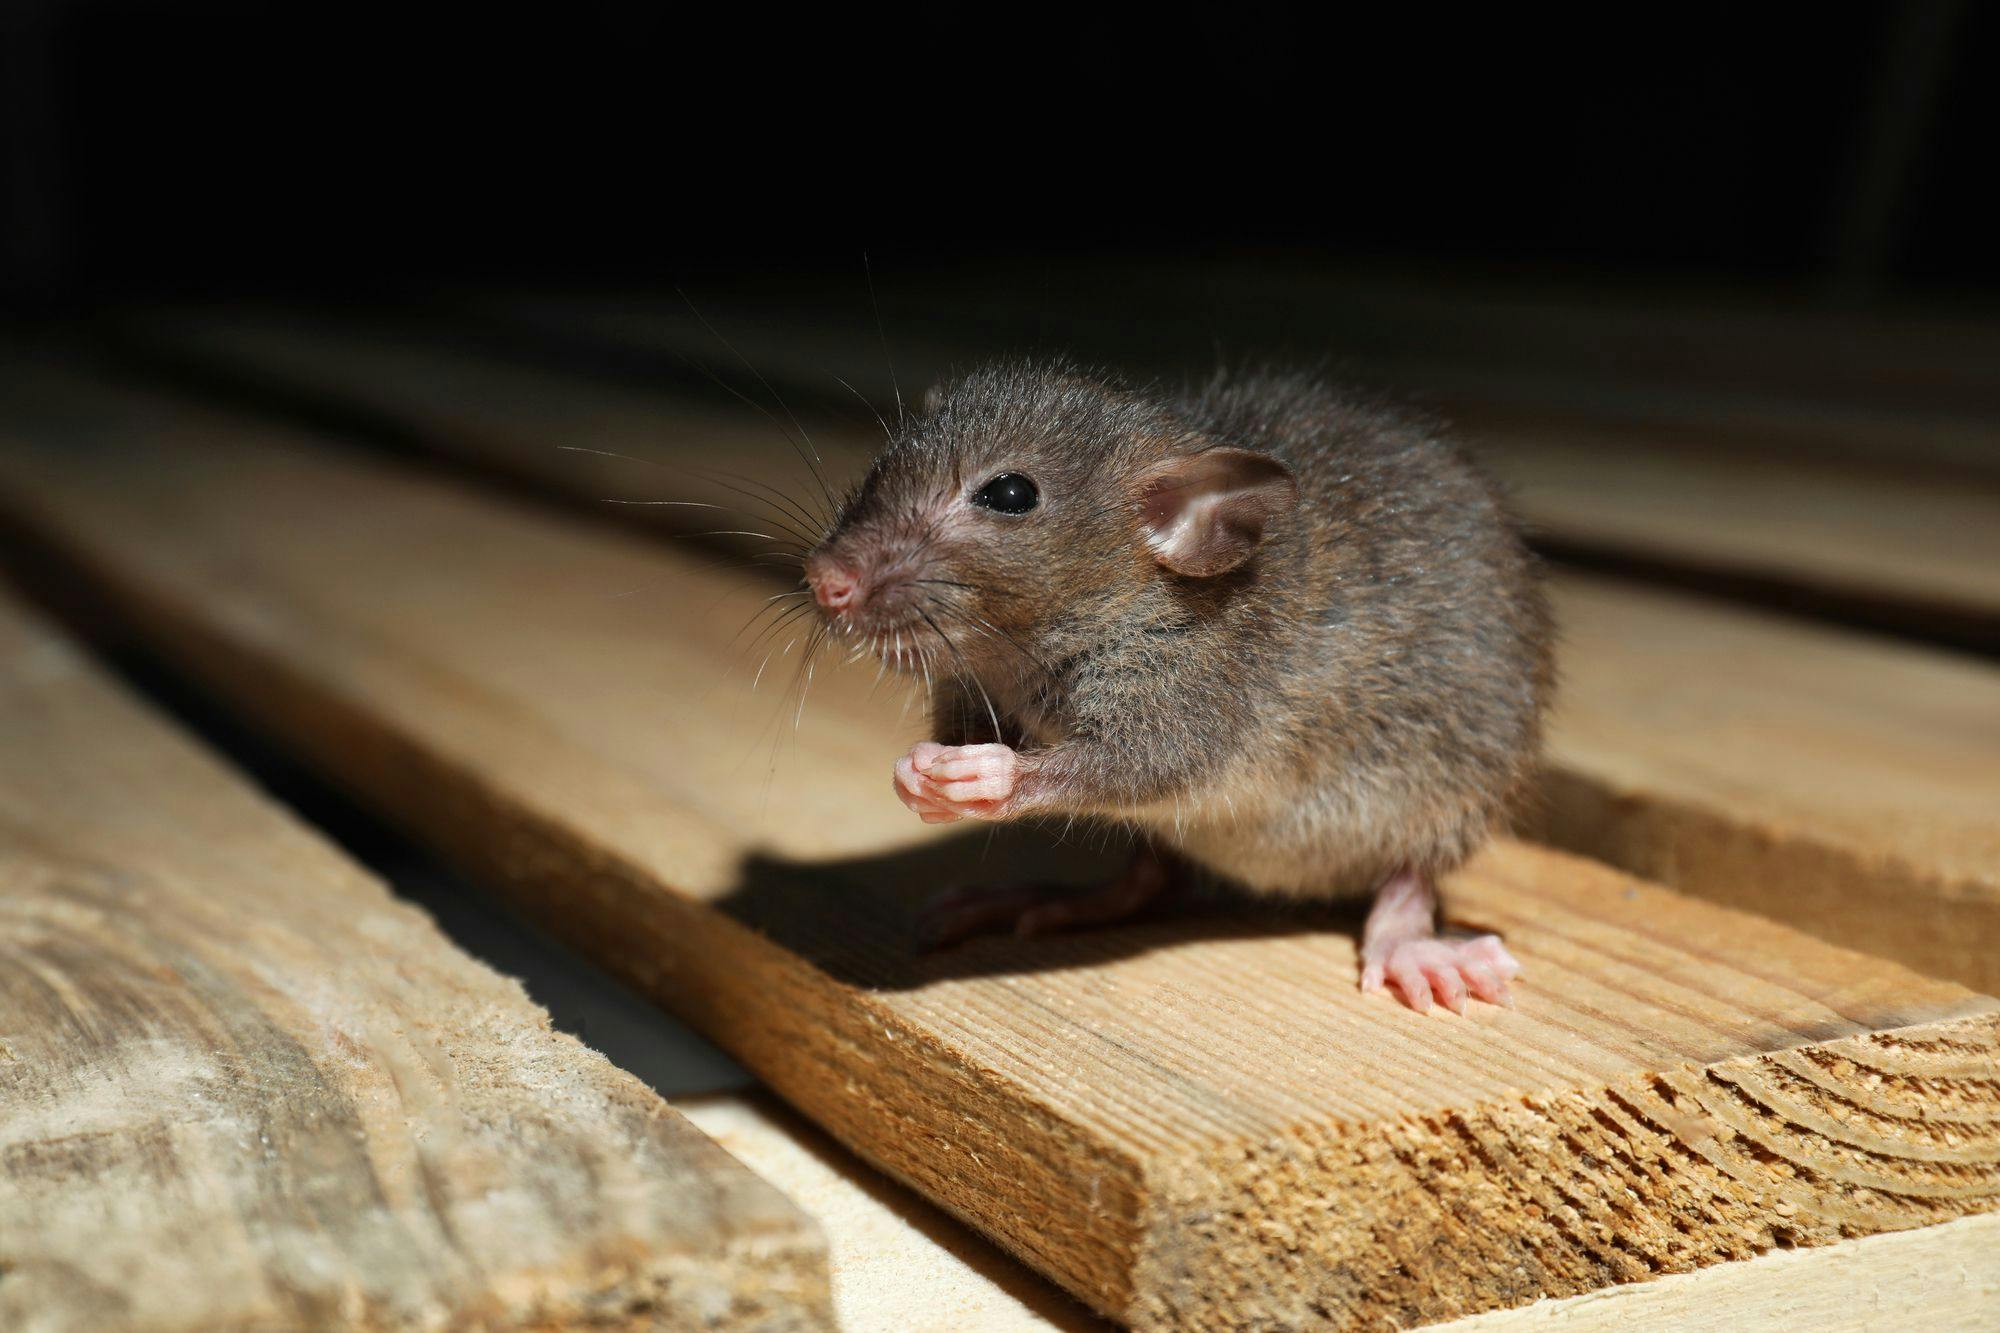 Guard against rodent infestations with Empire Lawn & Pest Control. Learn signs of infestation and effective prevention, control, and extermination techniques.